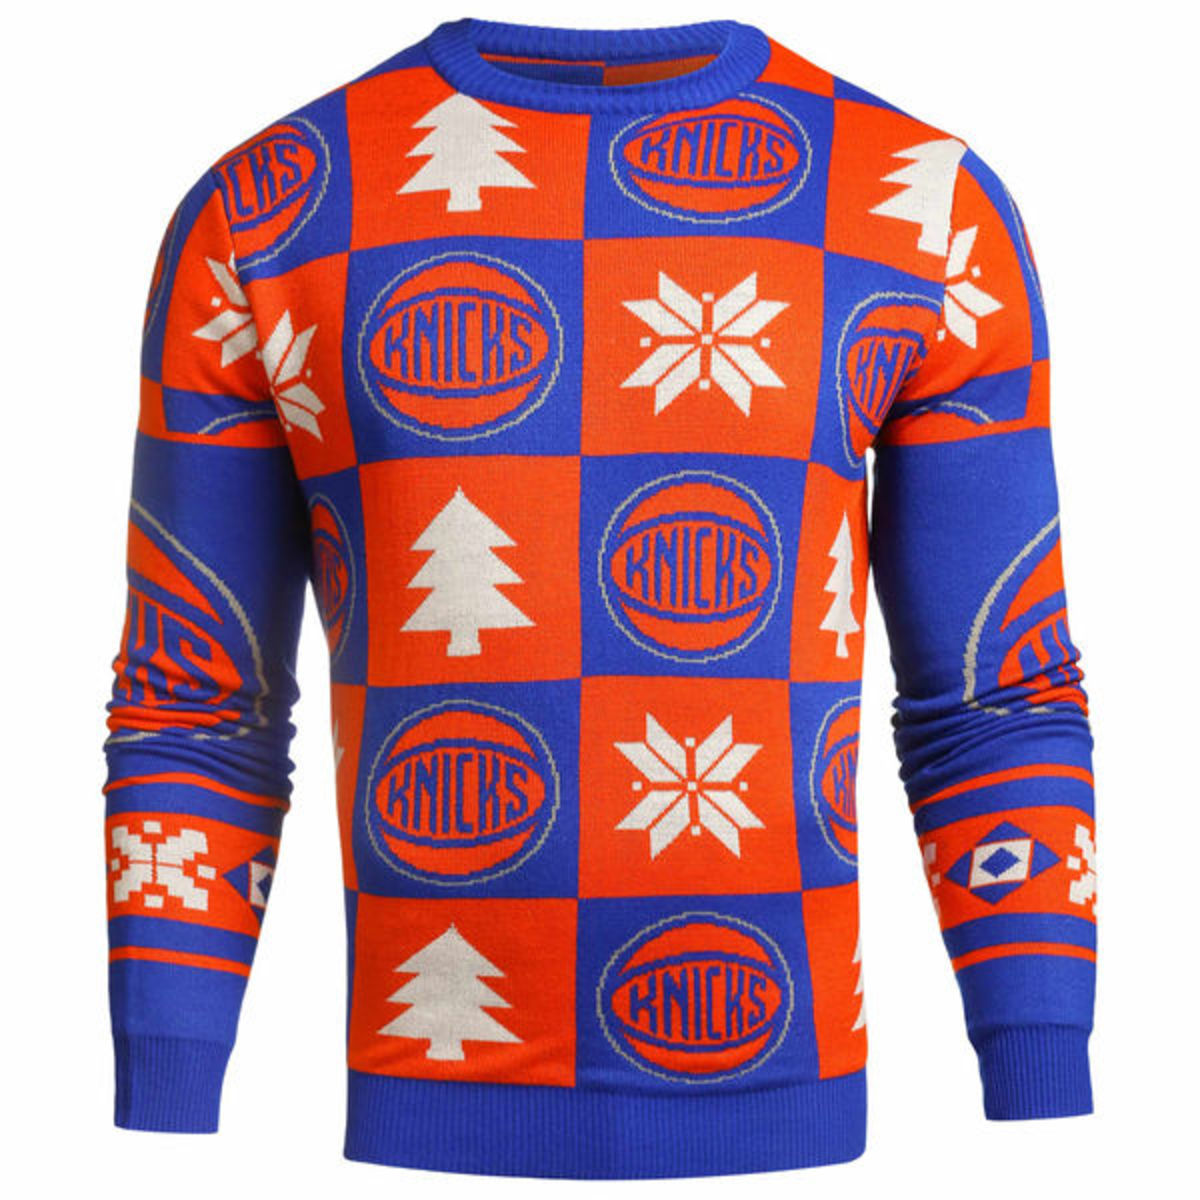 Ugly sports holiday sweaters in SI's store (Photos) - Sports